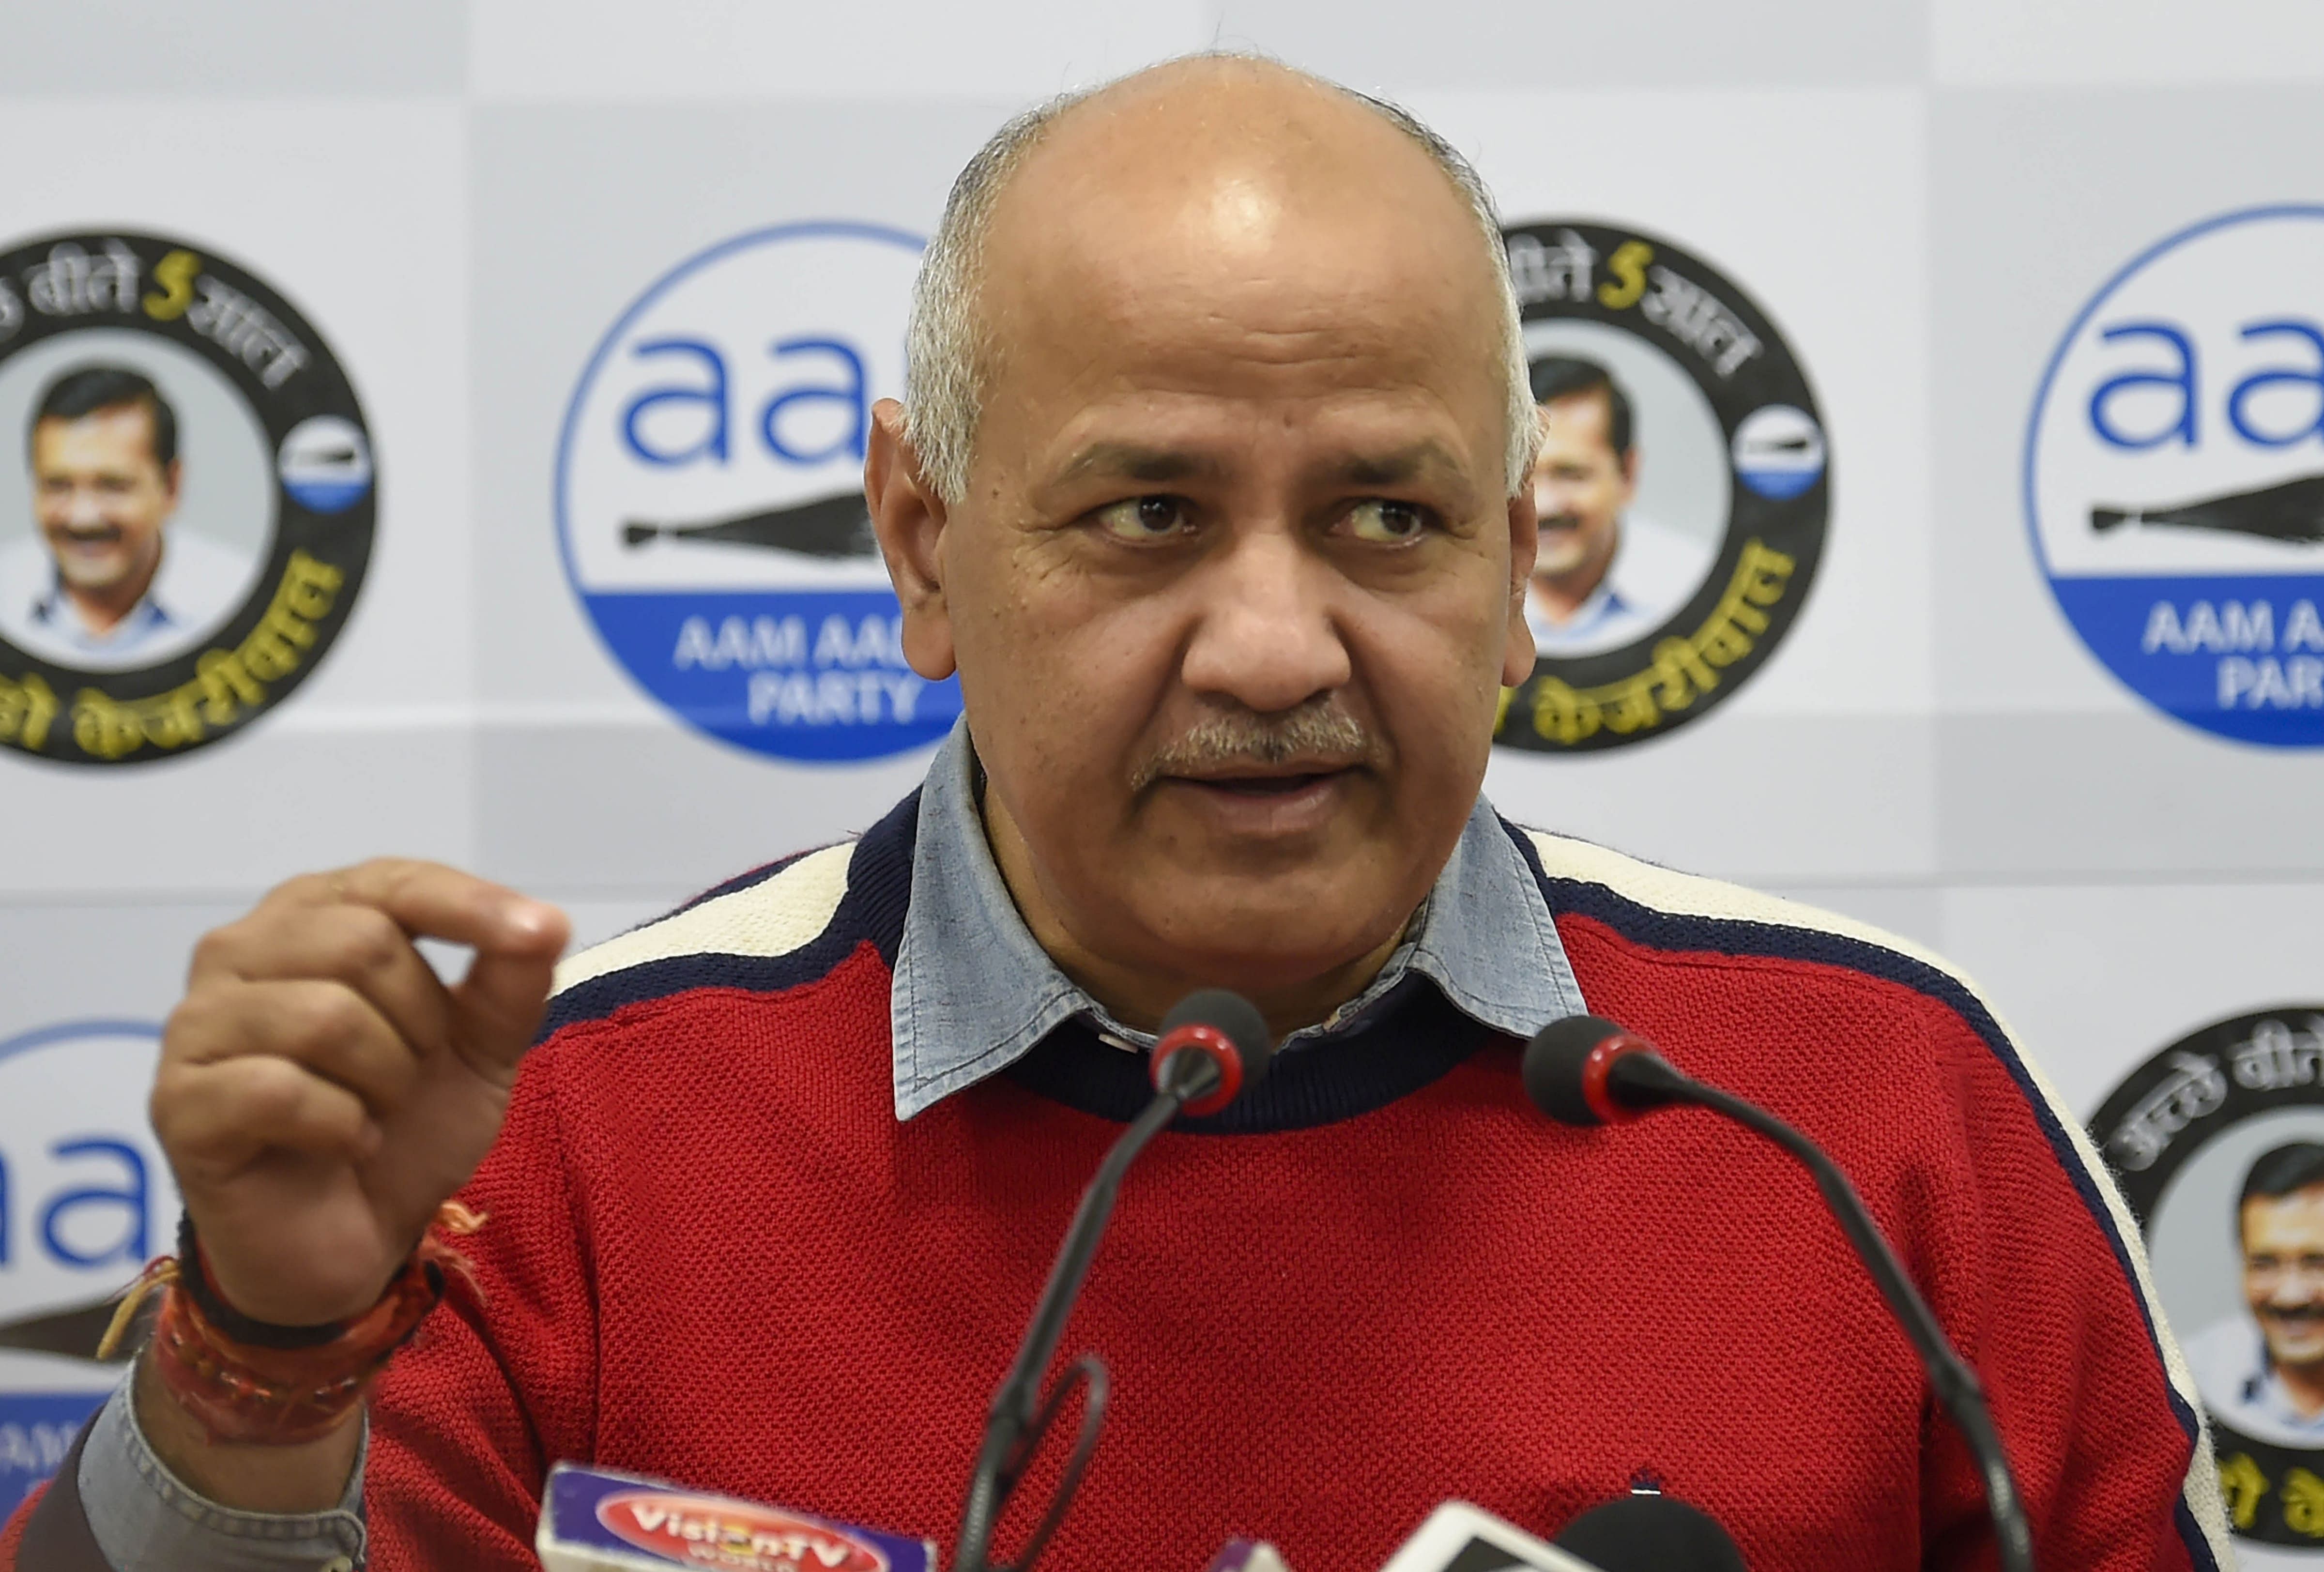 "We also have an effective people-centric government under the leadership of Chief Minister Arvind Kejriwal," he was quoted as saying in the statement. Credit: PTI Photo